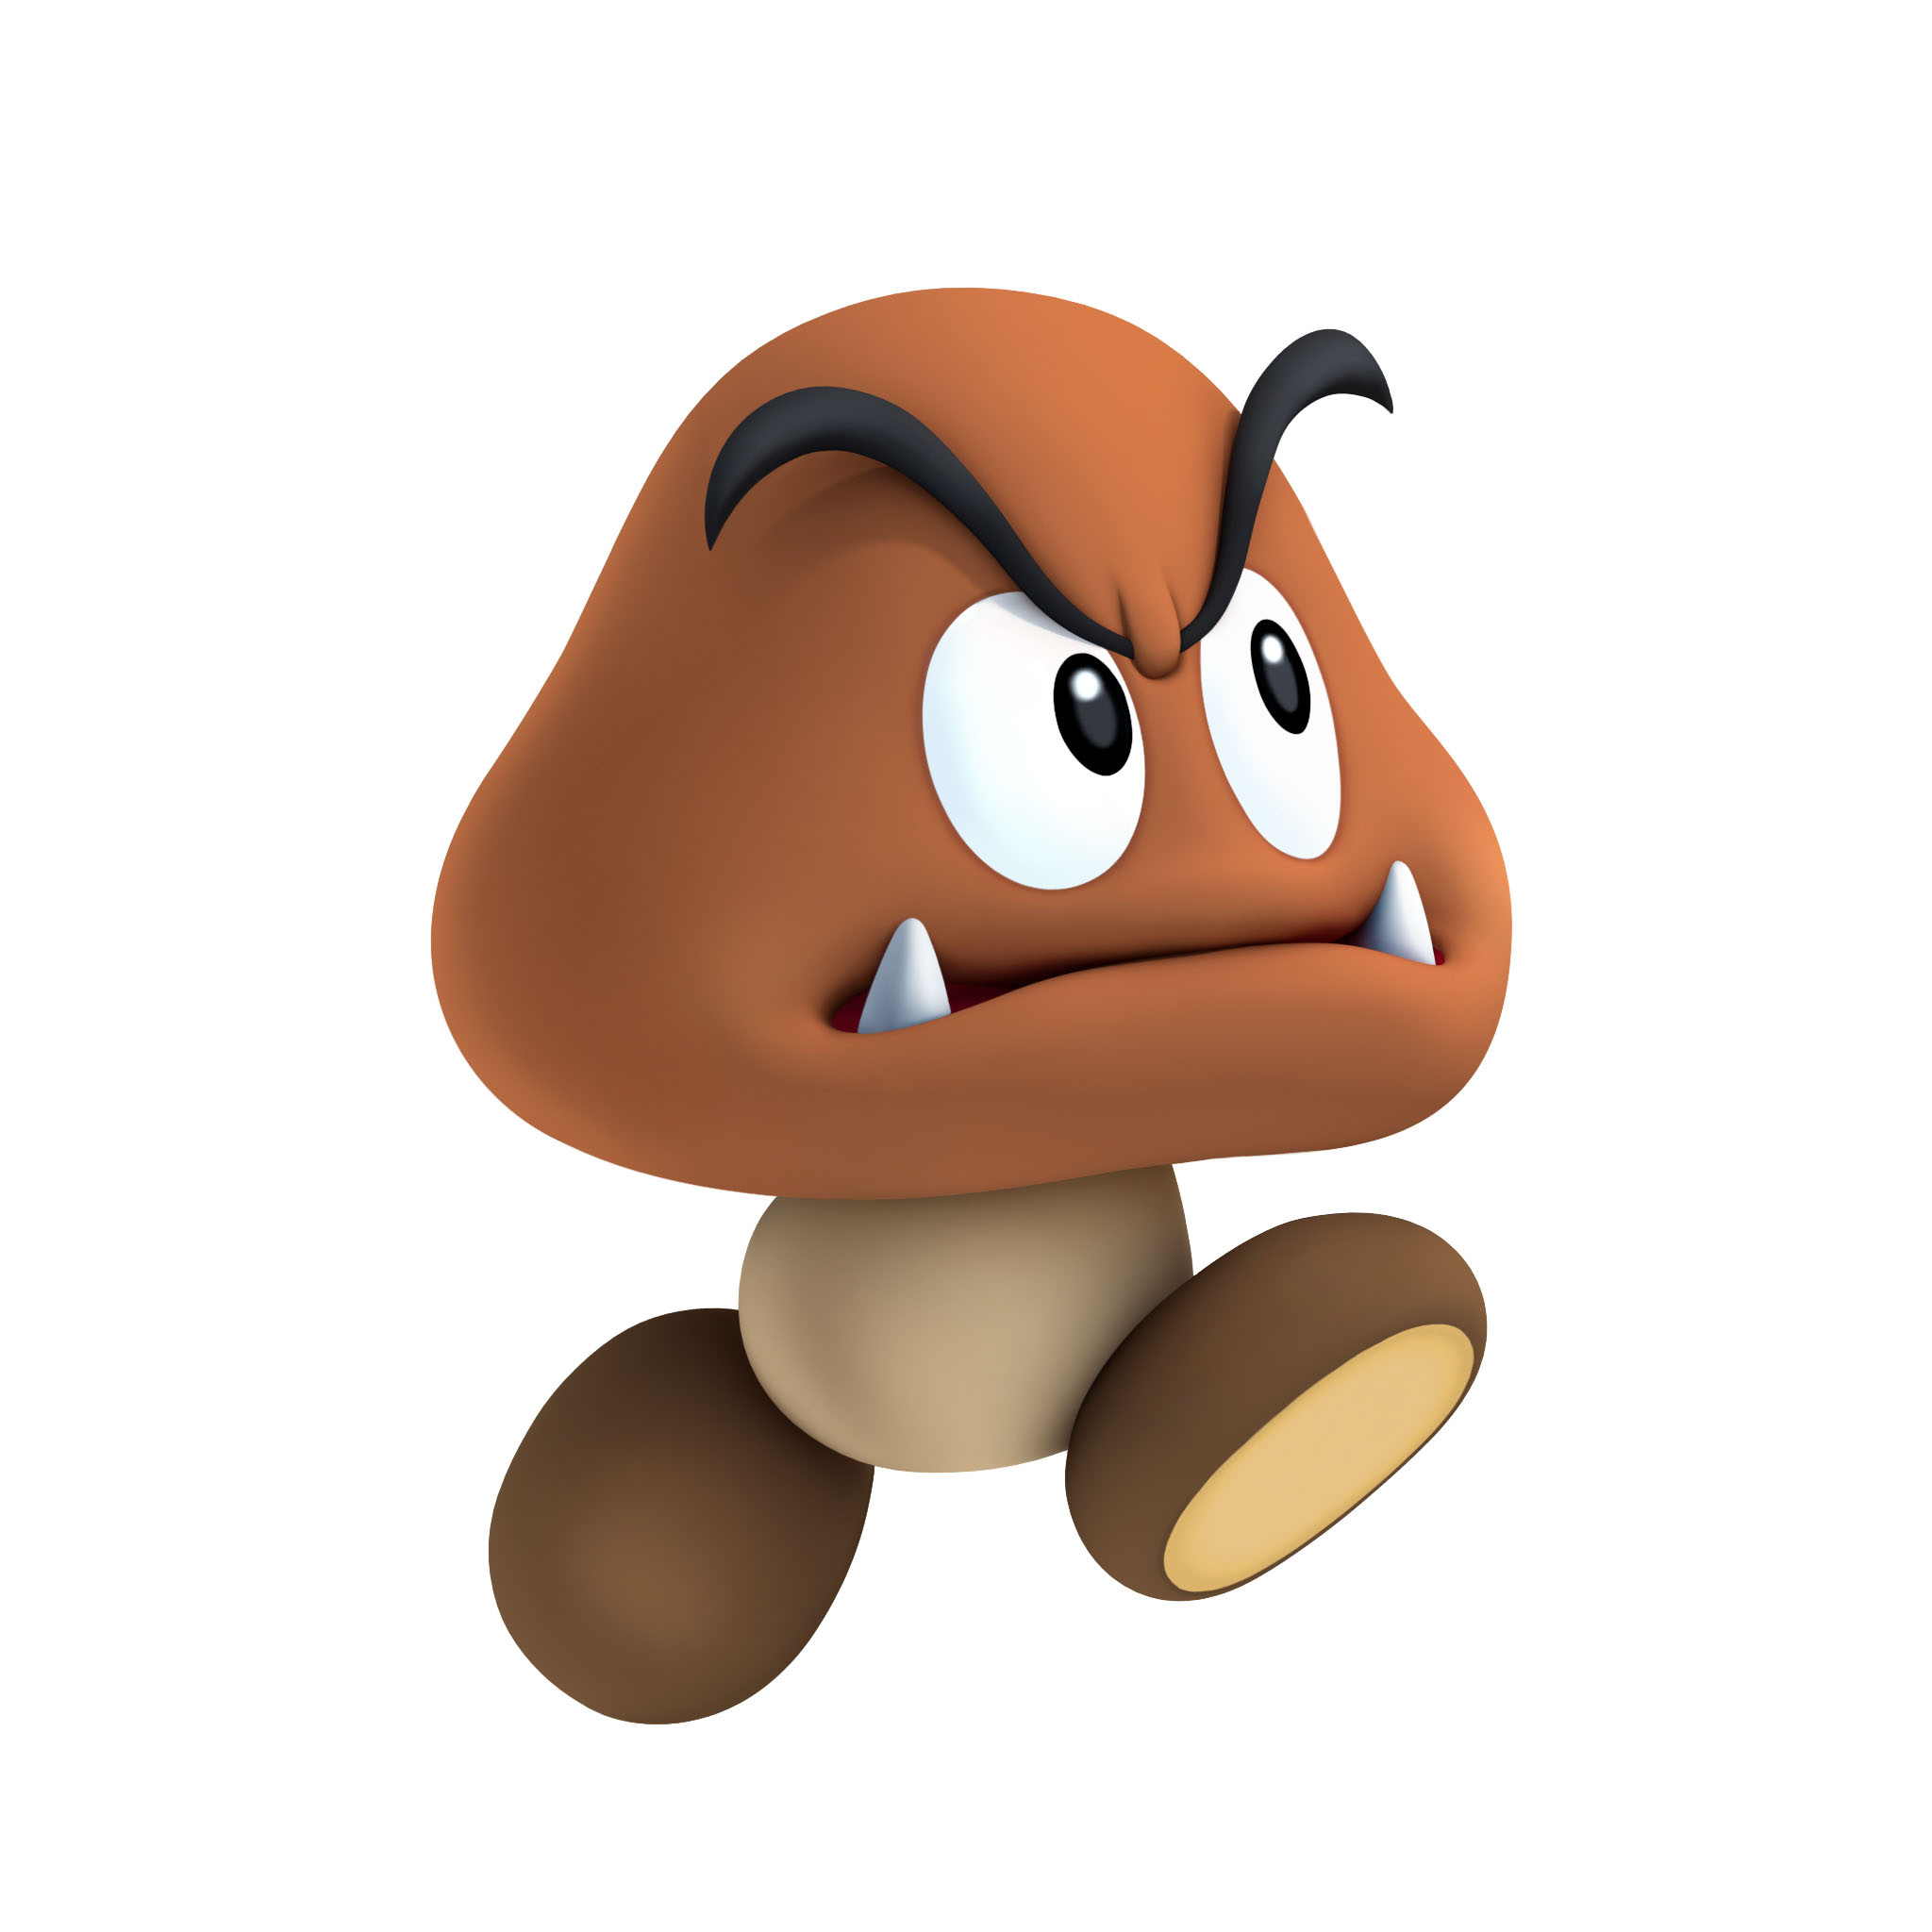 Goomba: An angry creature bumping into an enemy to hurt them, Koopa Troop, Super Mario Bros. 2050x2050 HD Wallpaper.